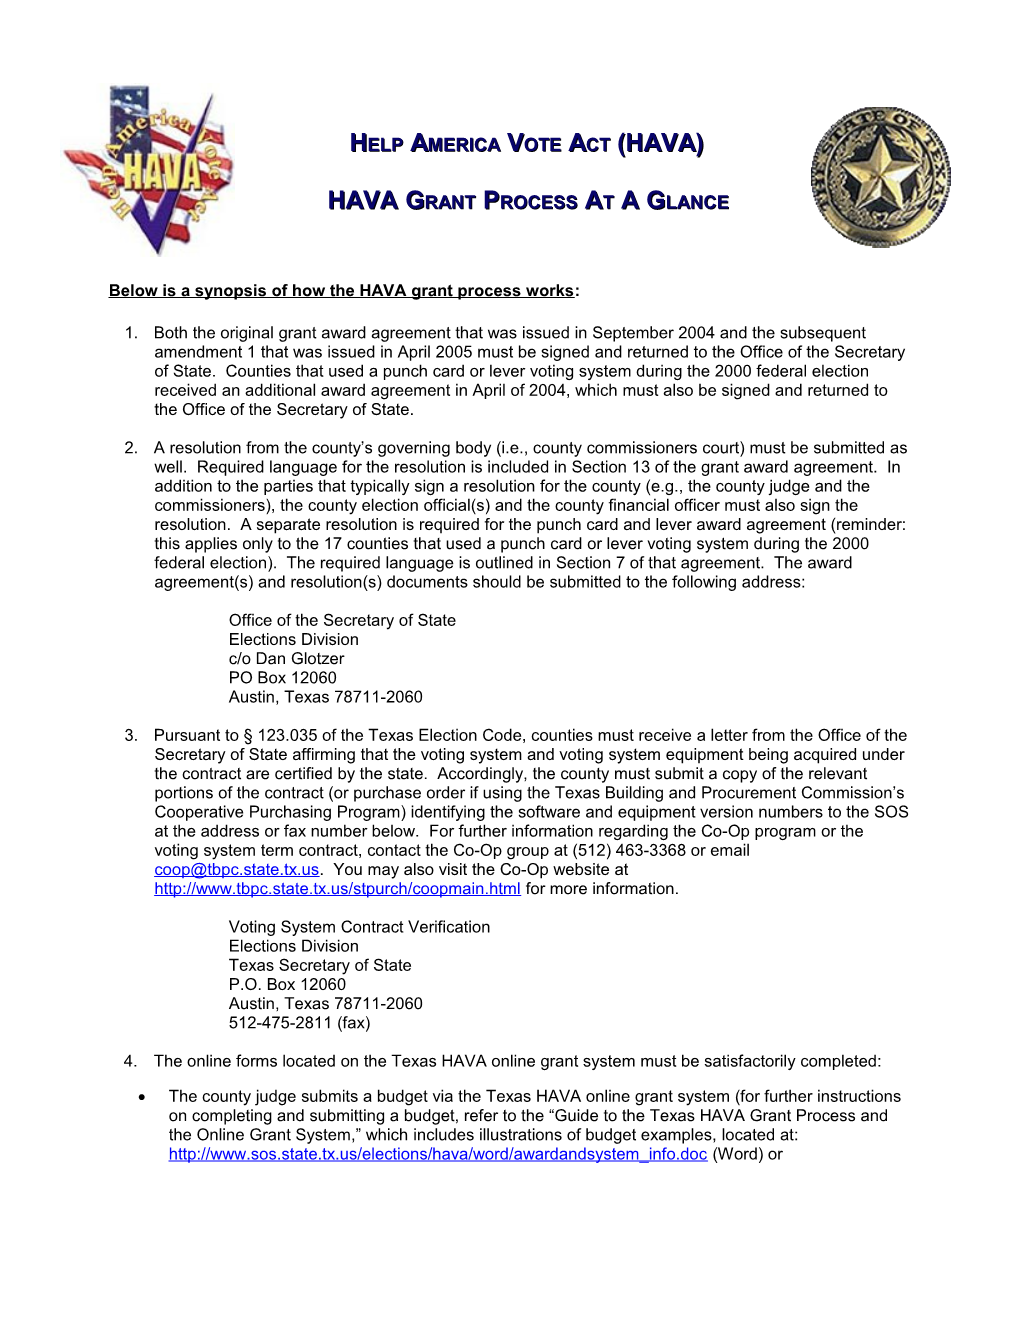 Below Is Information on How the HAVA Grant Process Works